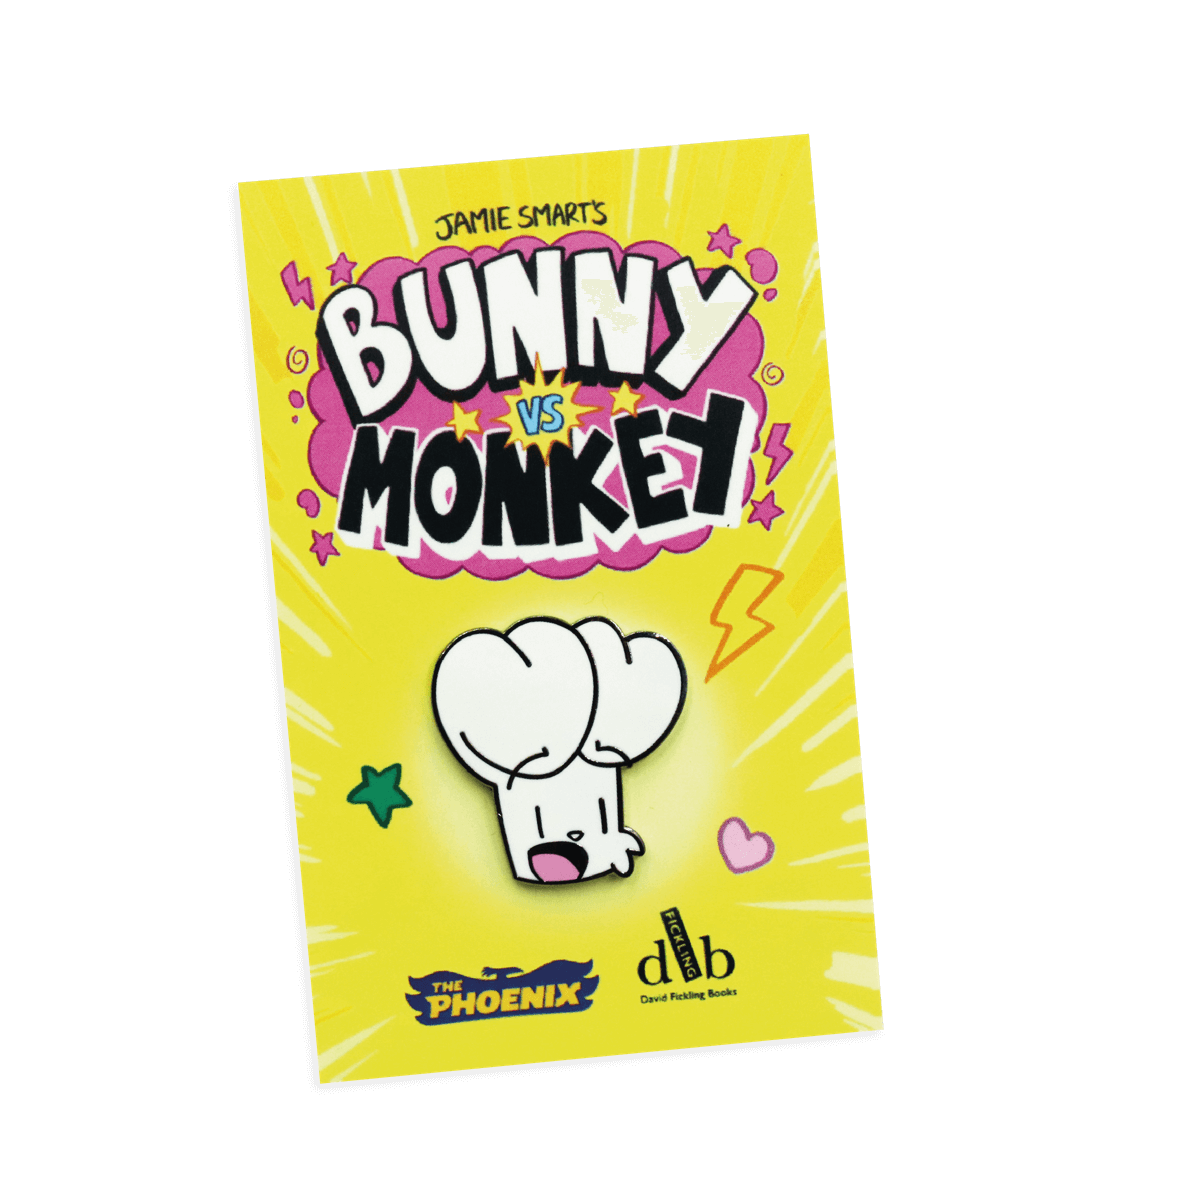 Look kids! It's Bunny from Bunny vs Monkey! He's on a backing card.